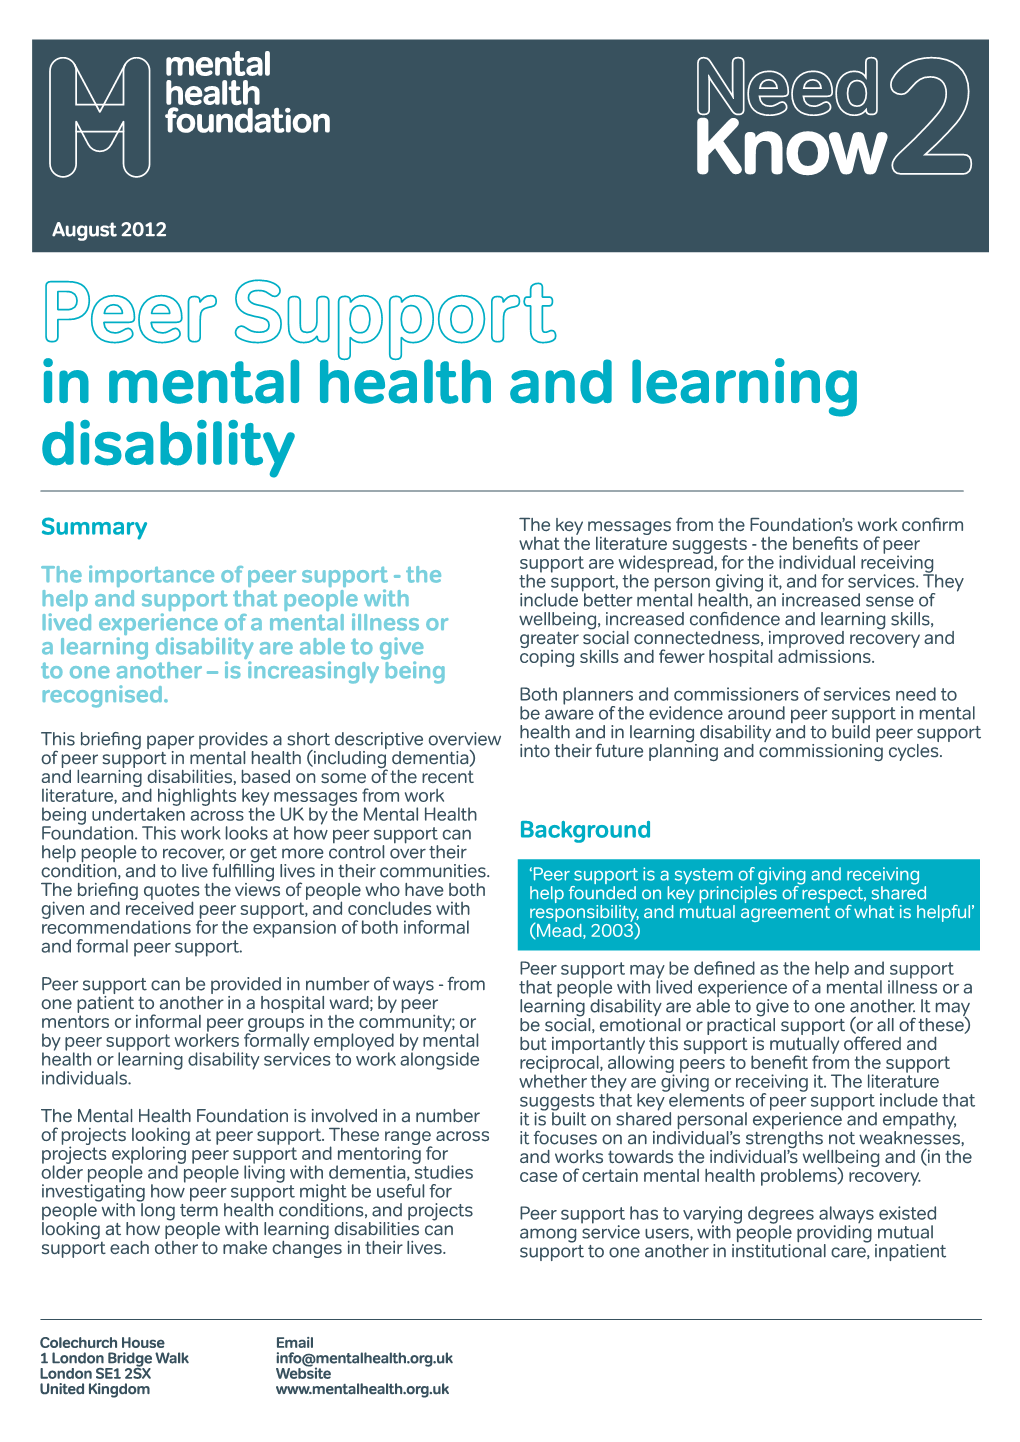 Peer Support in Mental Health and Learning Disability